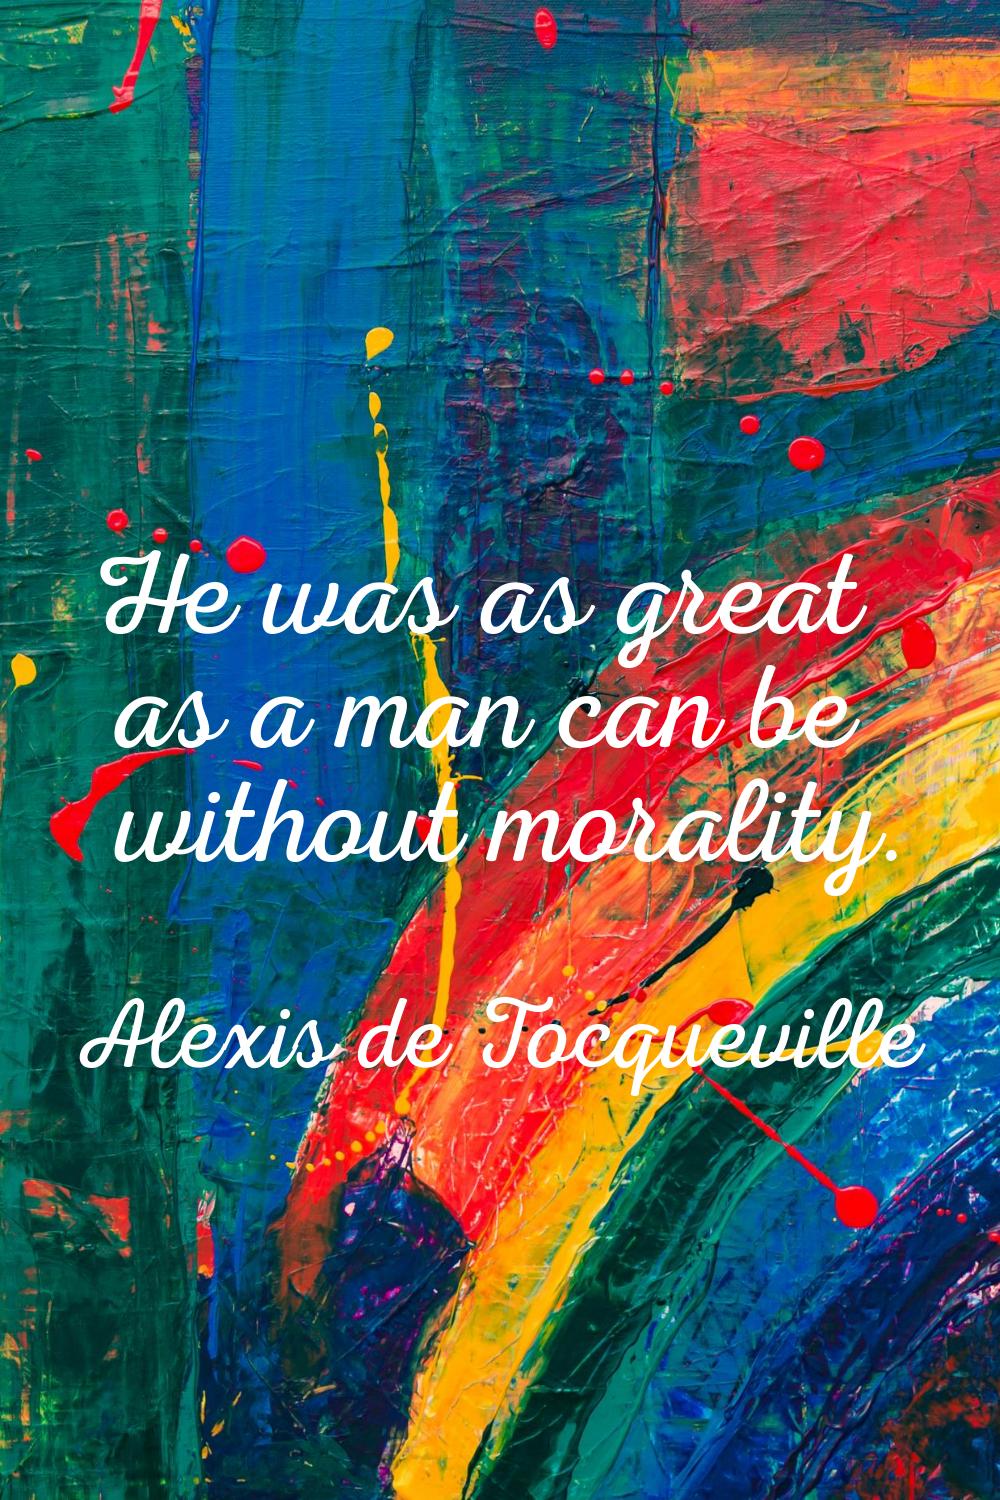 He was as great as a man can be without morality.